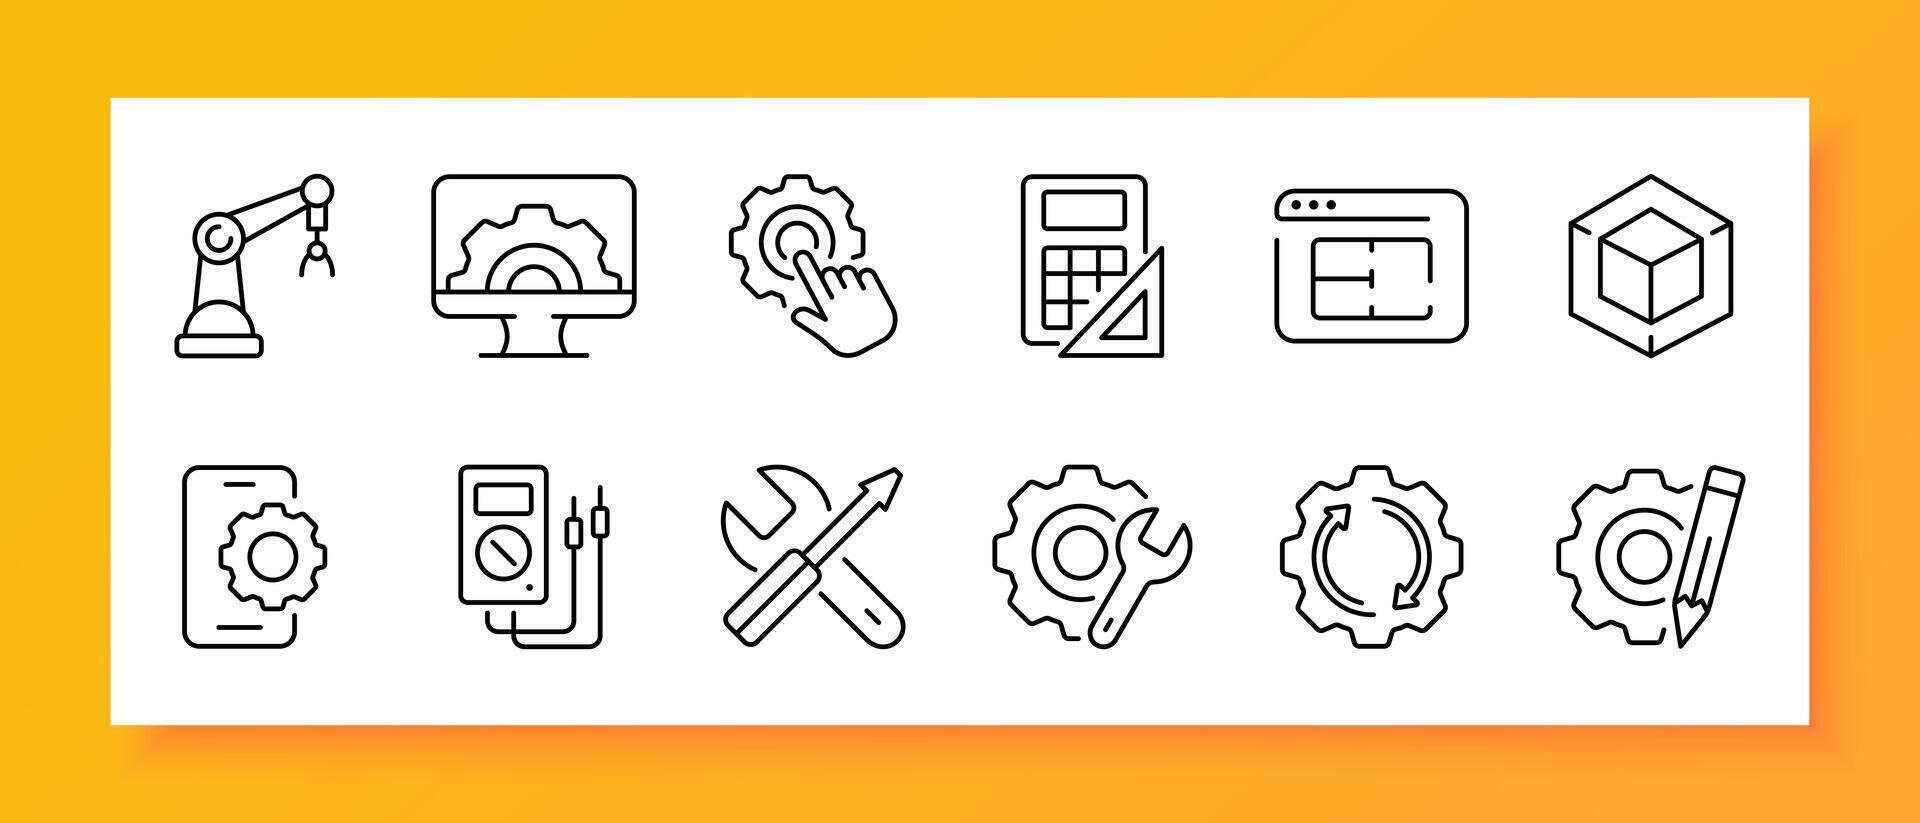 Technologies icon set. Hydraulic arm, calculator, drawing, marking, ruler, smartphone, ammeter, screwdriver. Black icon on a white background. Vector line icon for business and advertising